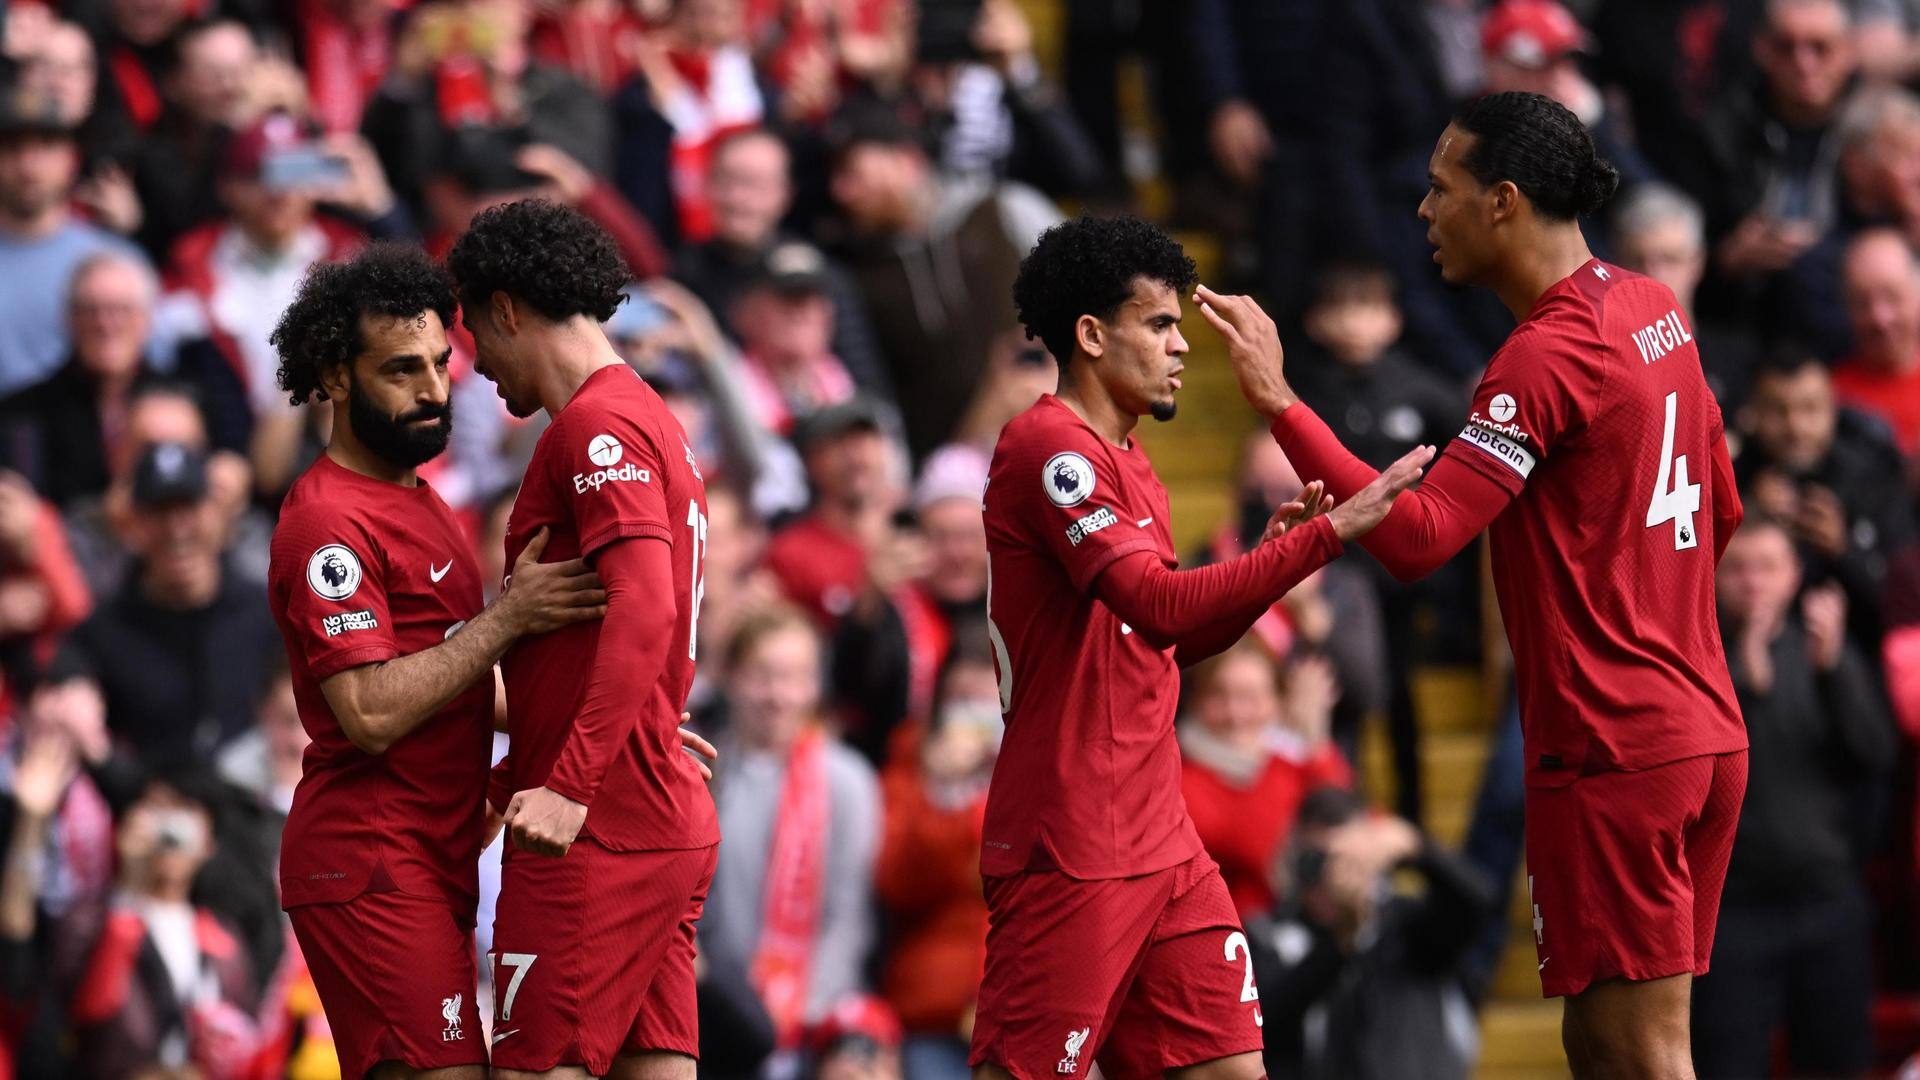 Liverpool claim dramatic 4-3 win over Spurs at Anfield: Stats